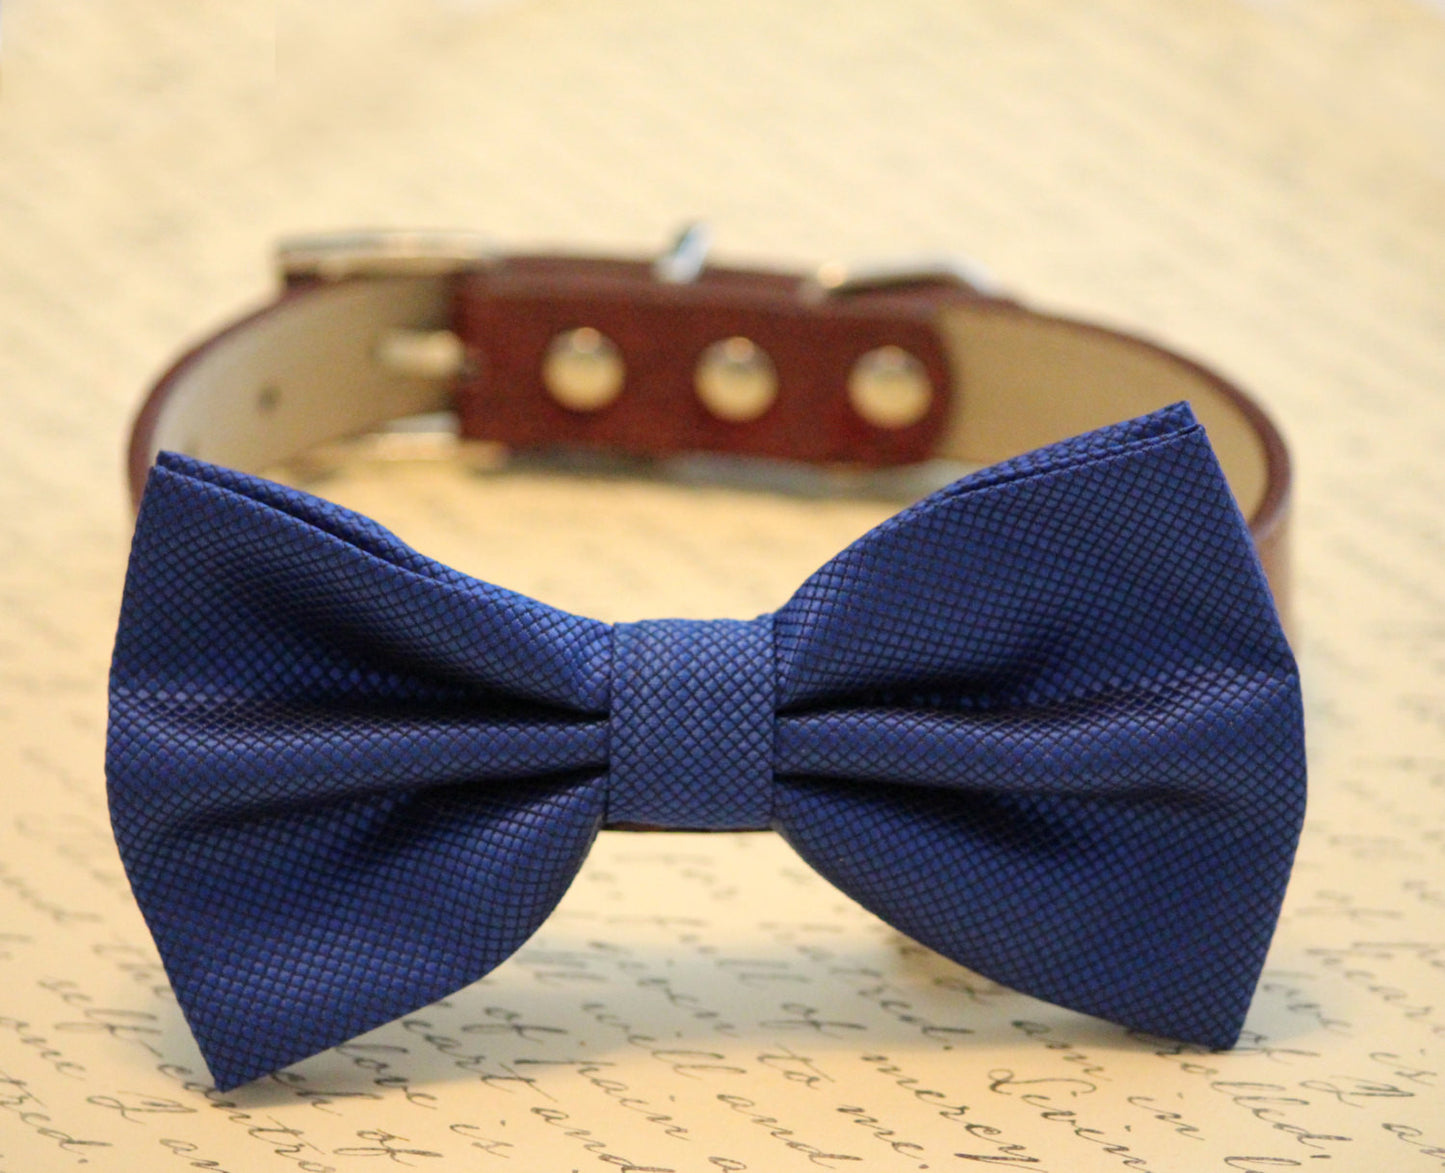 Blue and Brown 2 Dog Collars, Floral and Bow tie Wedding dog accessory , Wedding dog collar